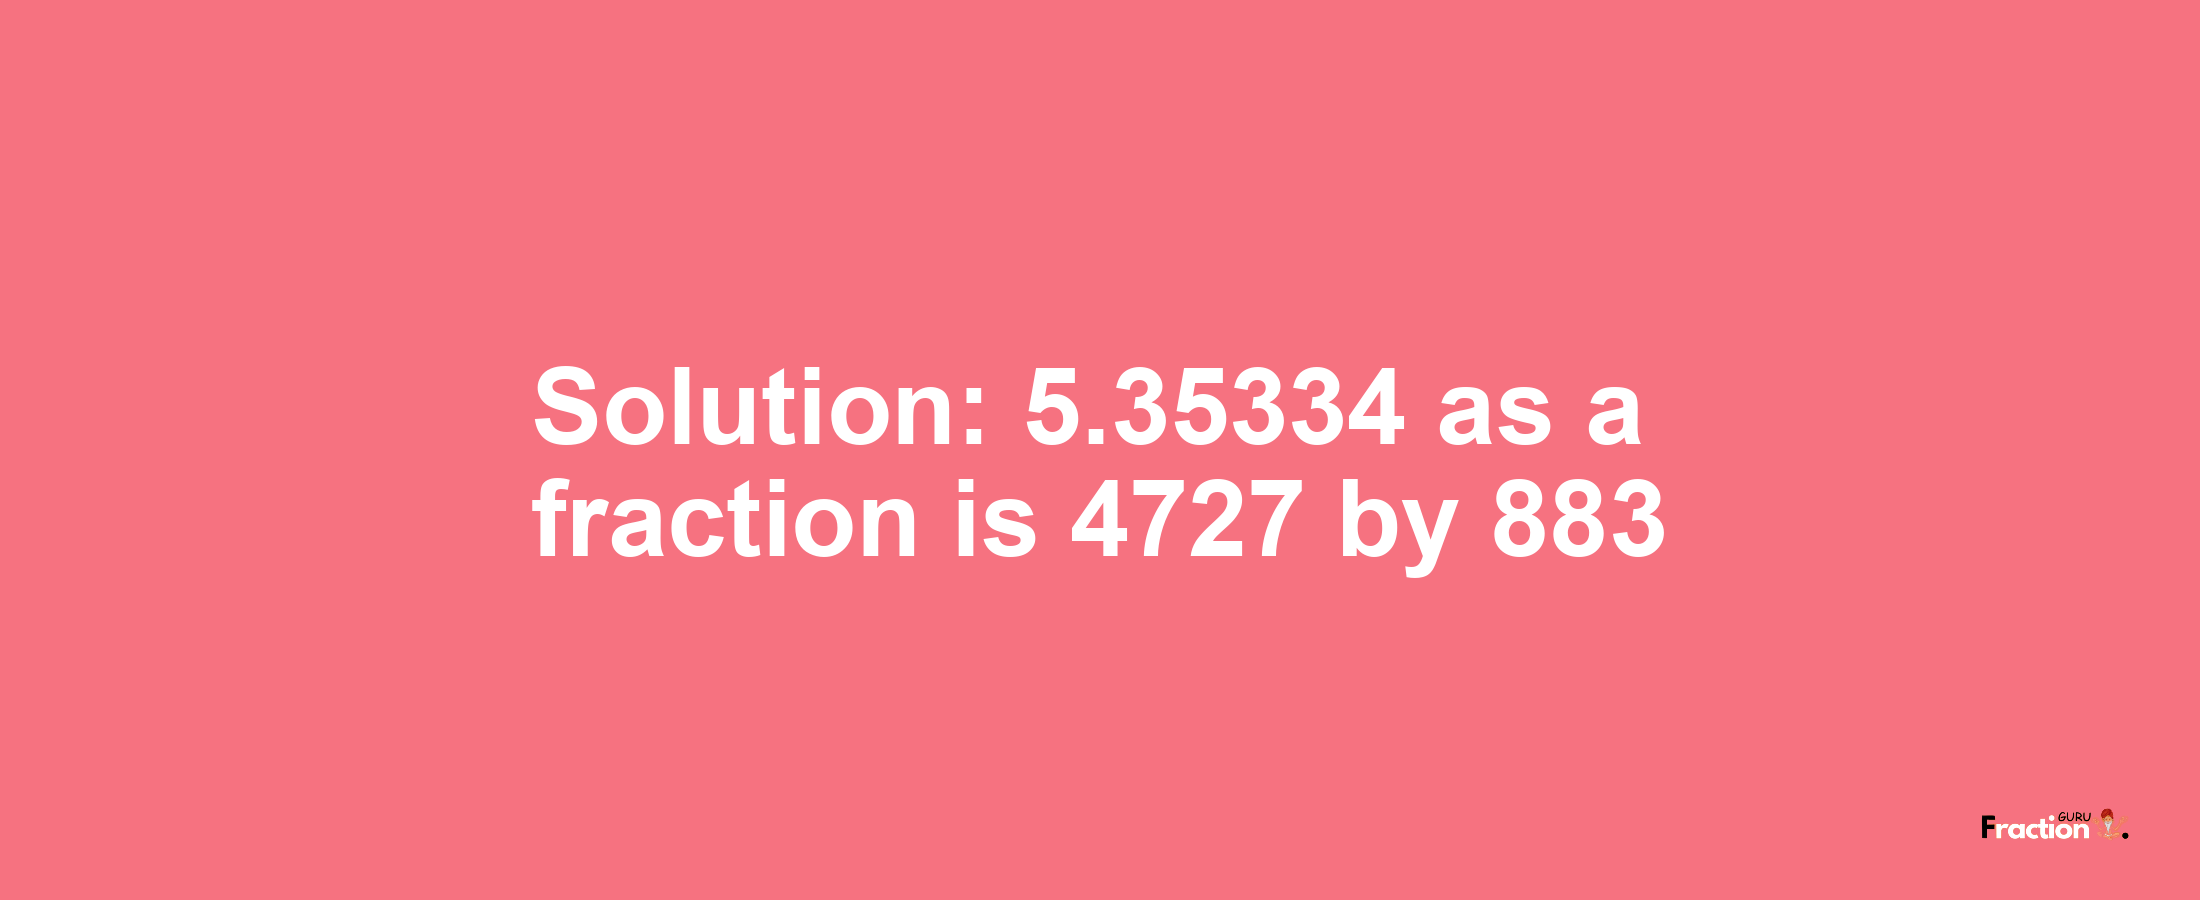 Solution:5.35334 as a fraction is 4727/883